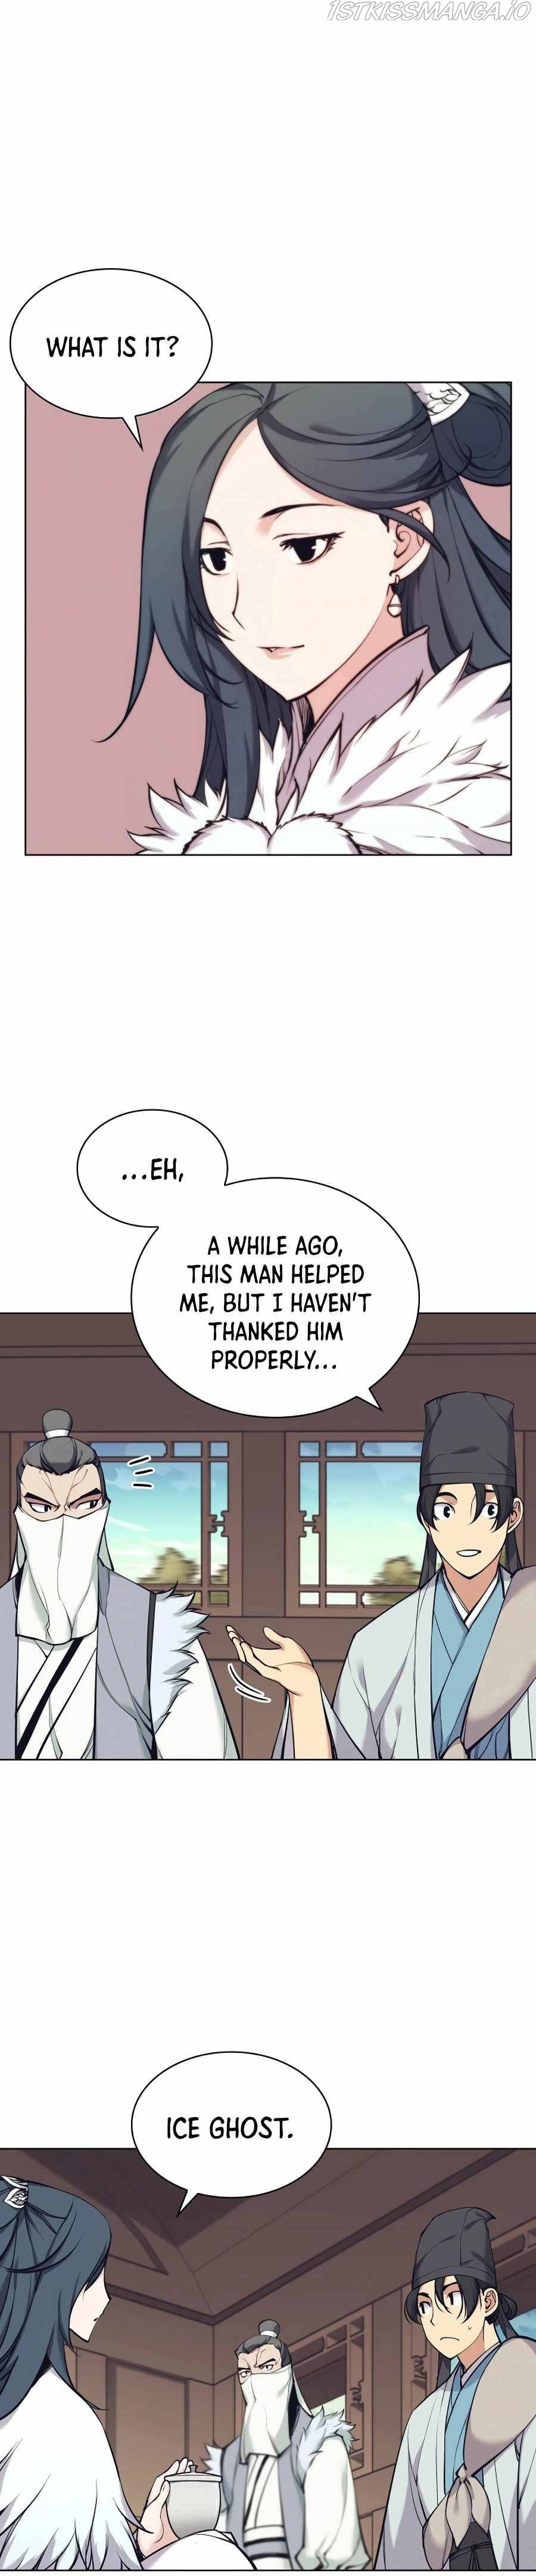 Records of the Swordsman Scholar chapter 18